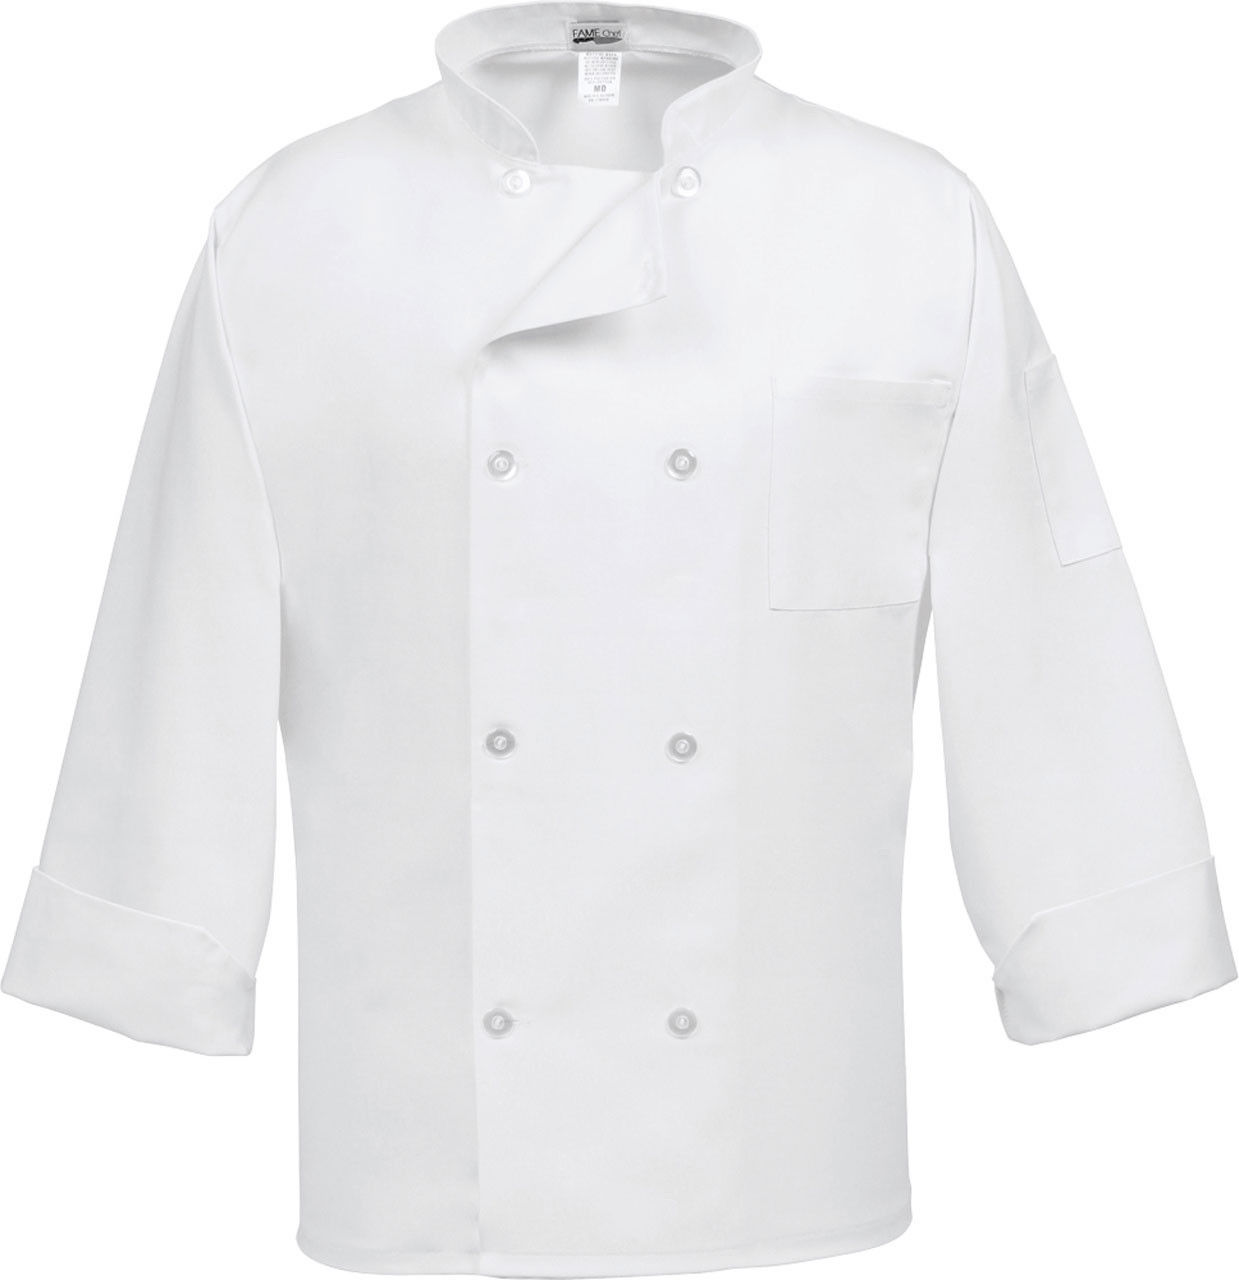 How heavy is the fabric of this 8 button chef coat?